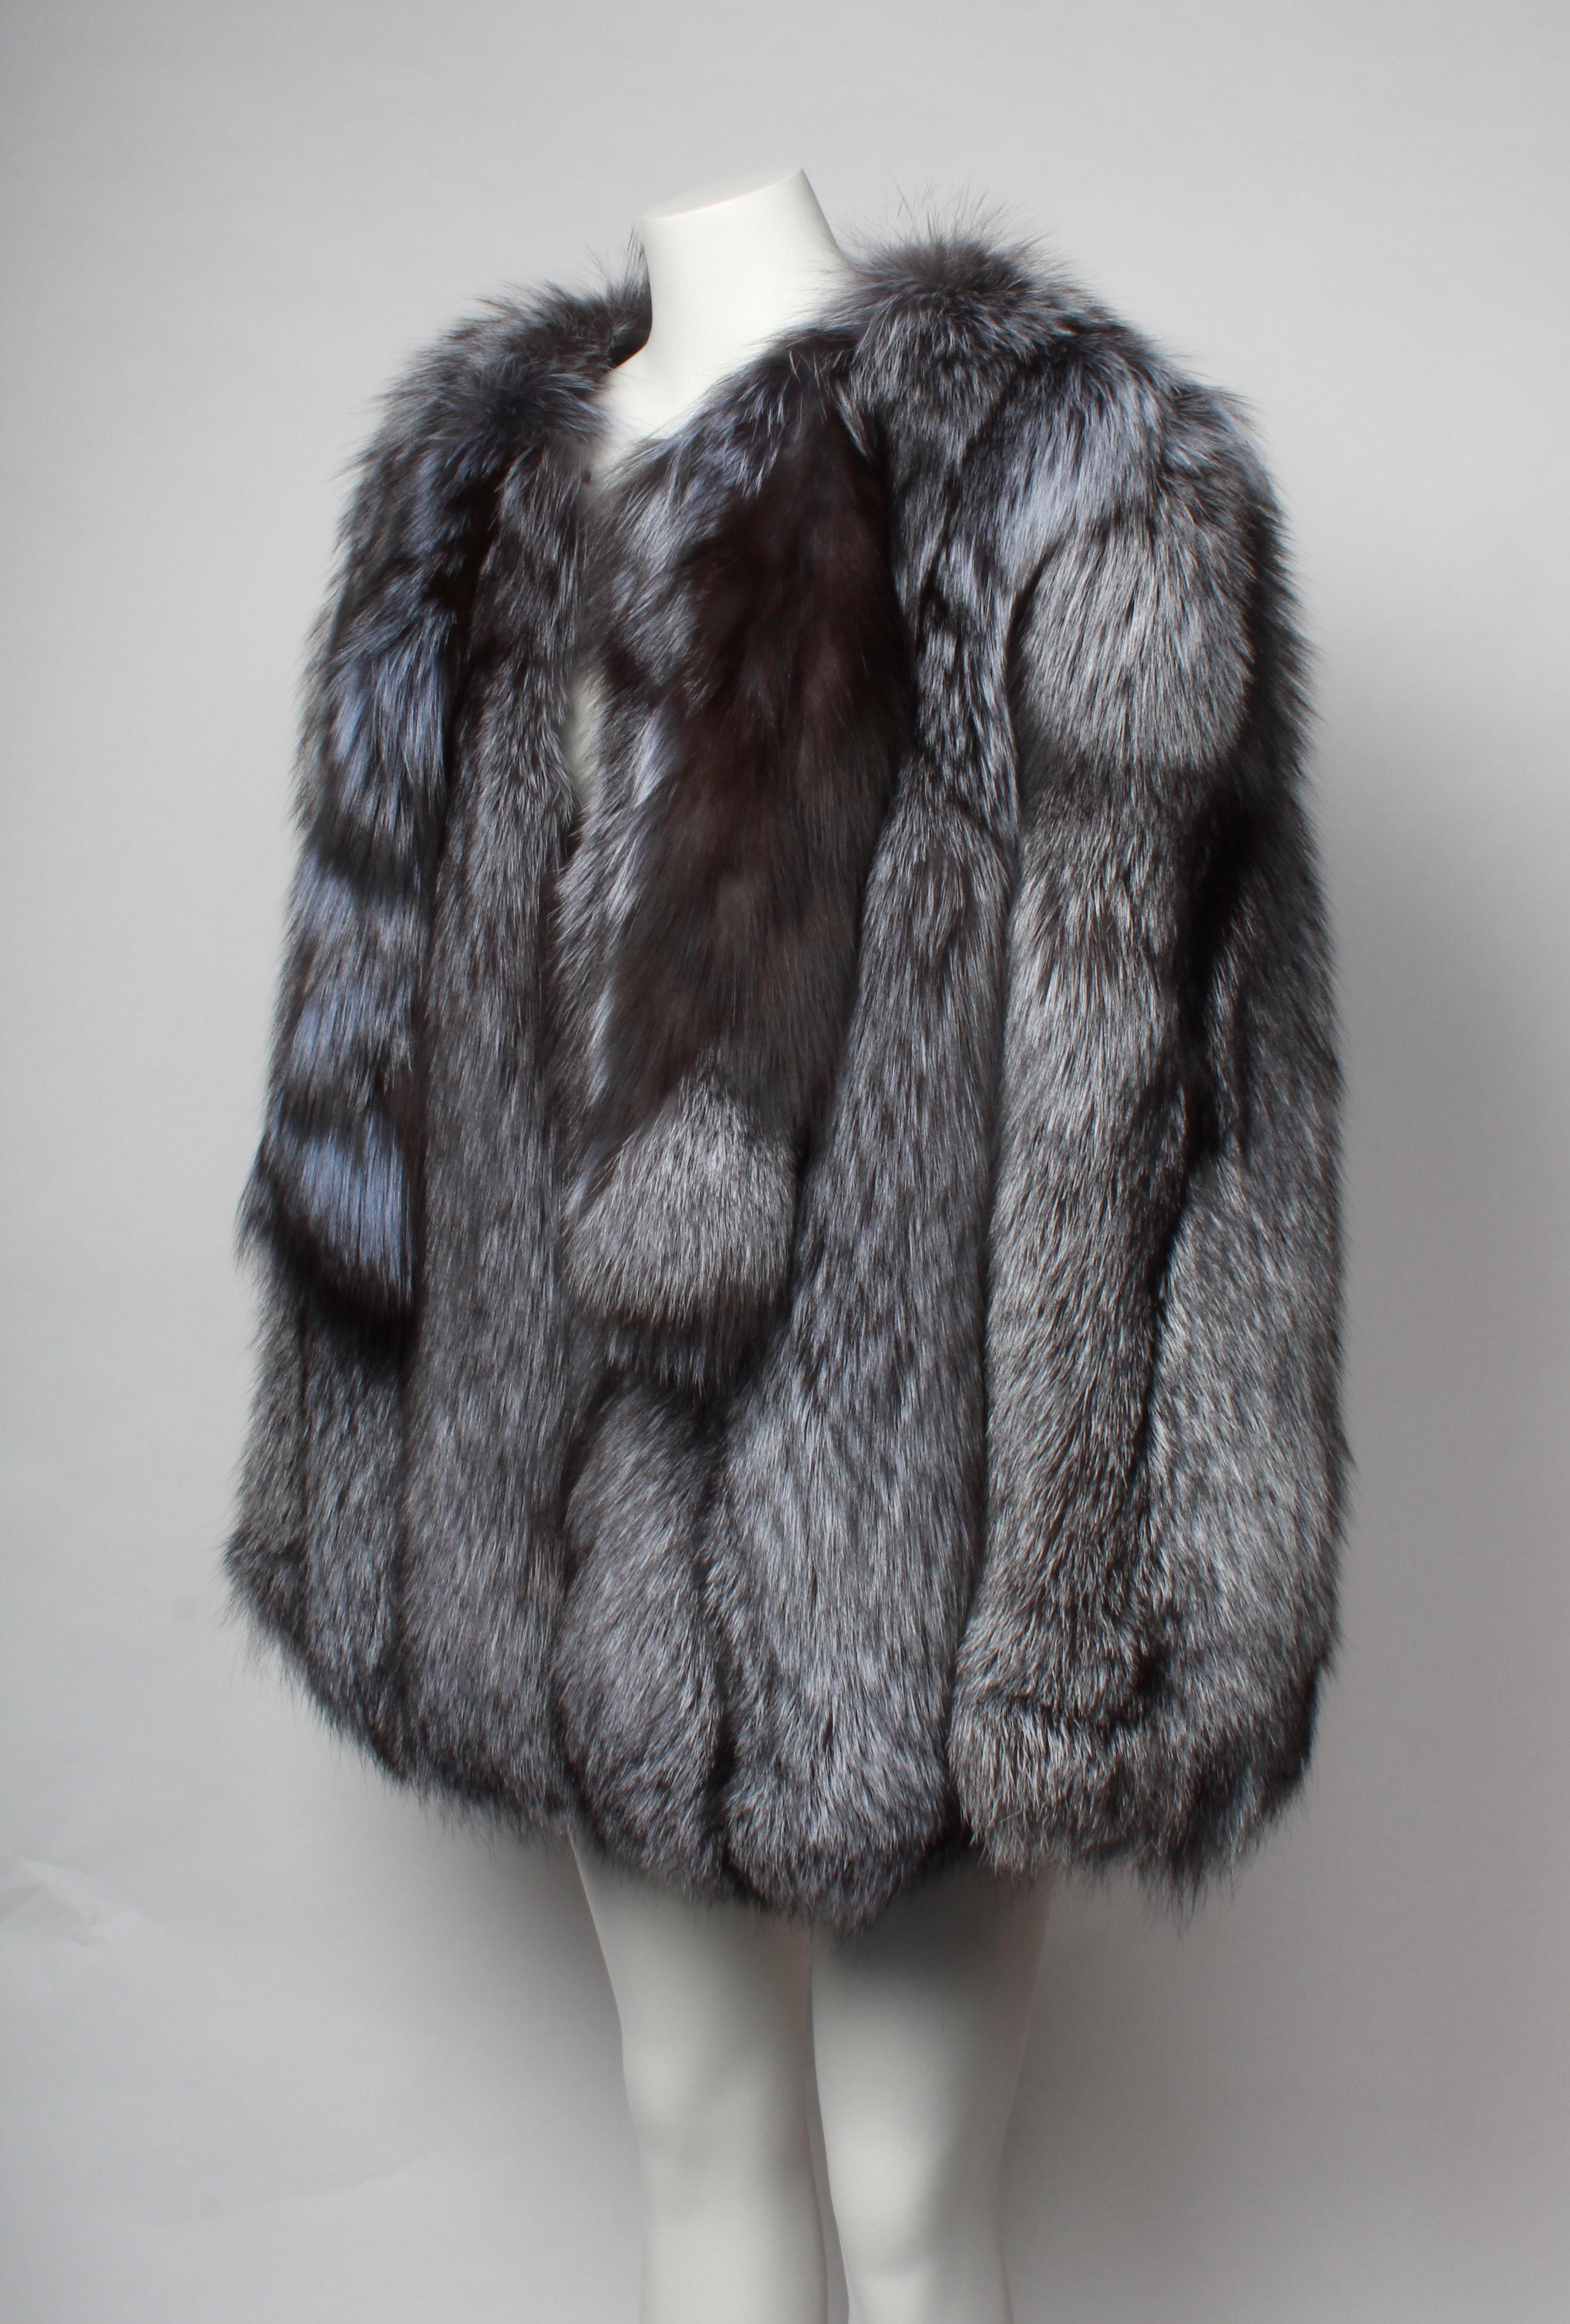 Made in Scandinavia, this is an incredible Blue Silver Fox Coat. The coat is over sized and fits a medium to large. The coat features neckties dyed lilac and five fastening hooks.